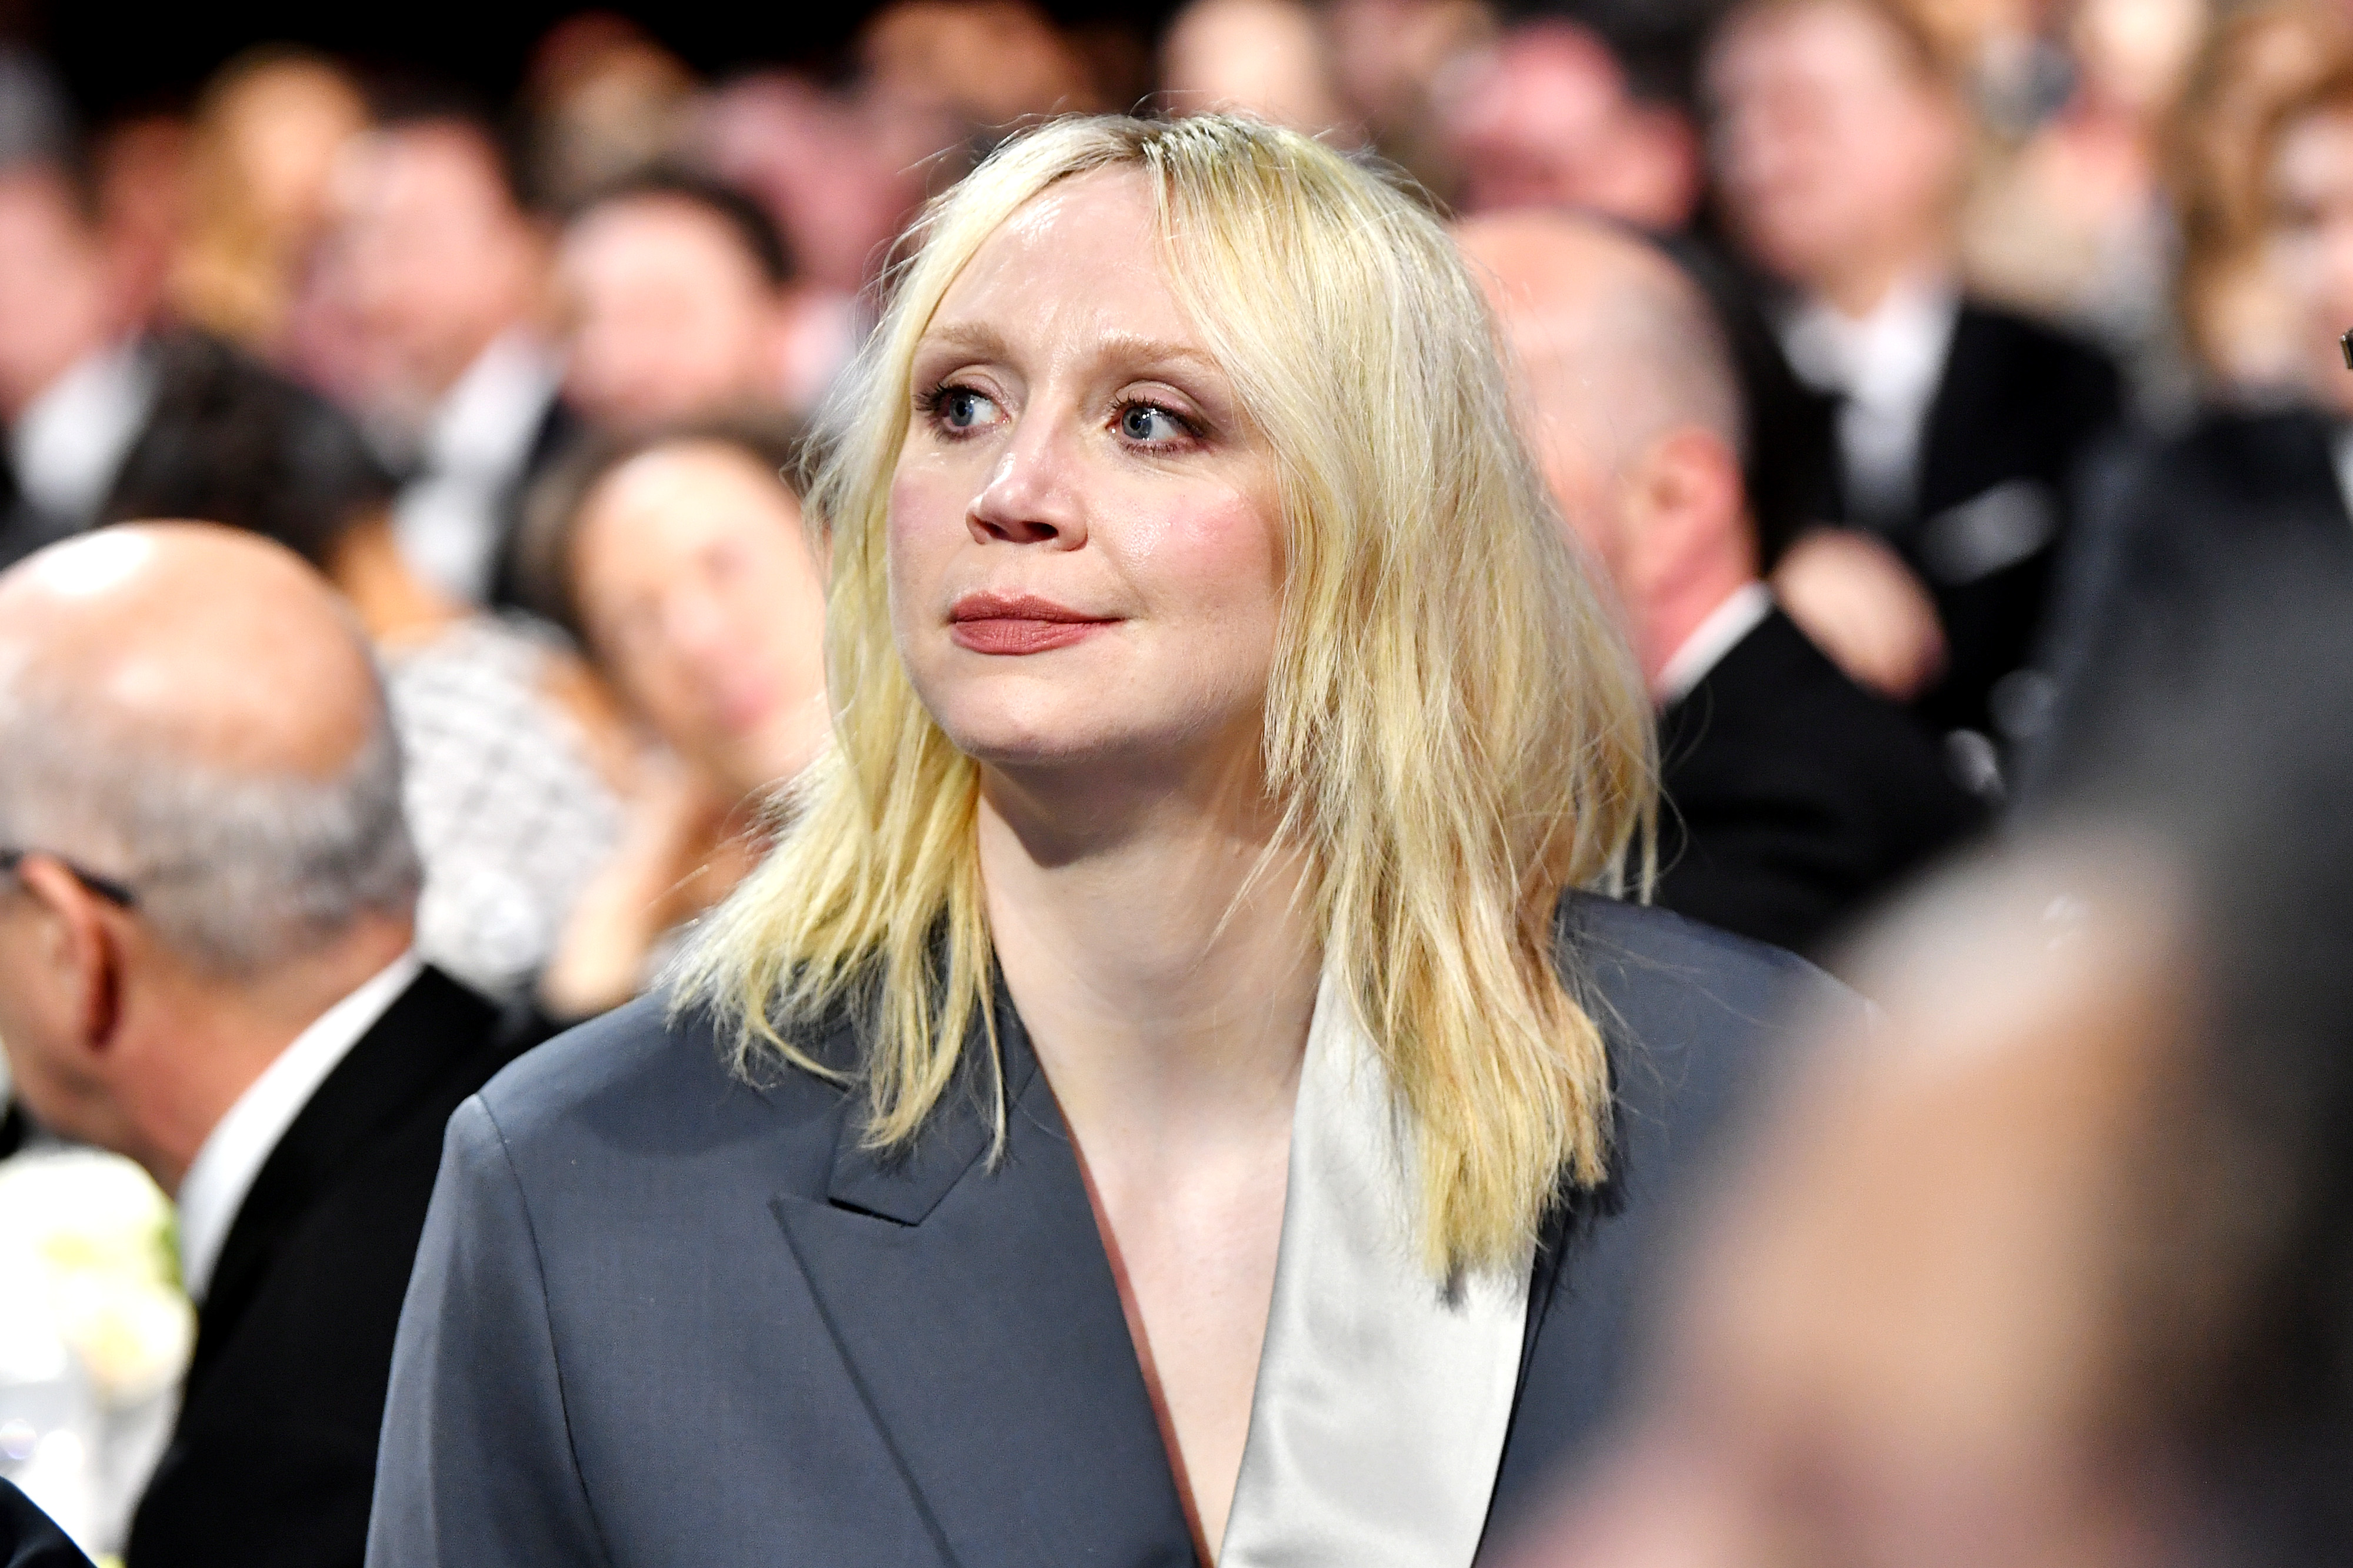 Gwendoline Christie: 13 little-known facts about the English actress and model